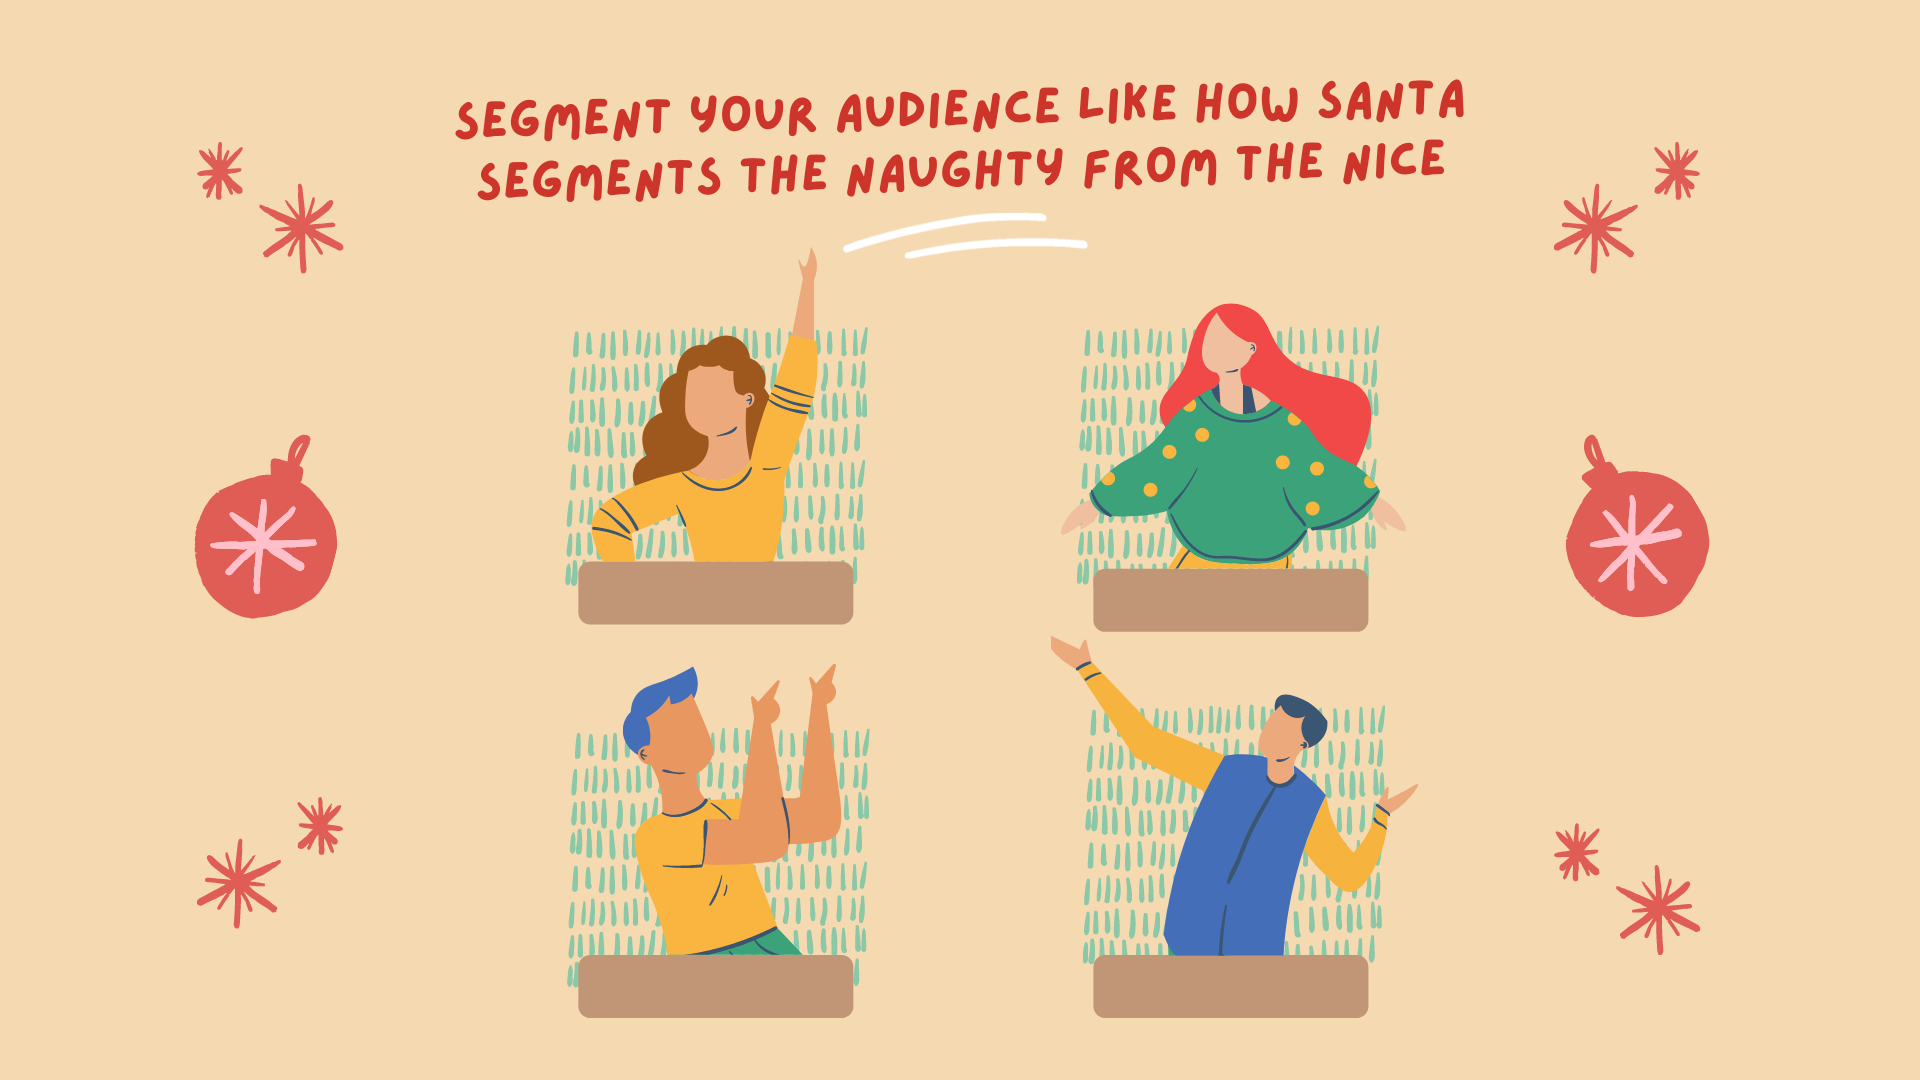 Segment your audience like how santa segments the naughty from the nice